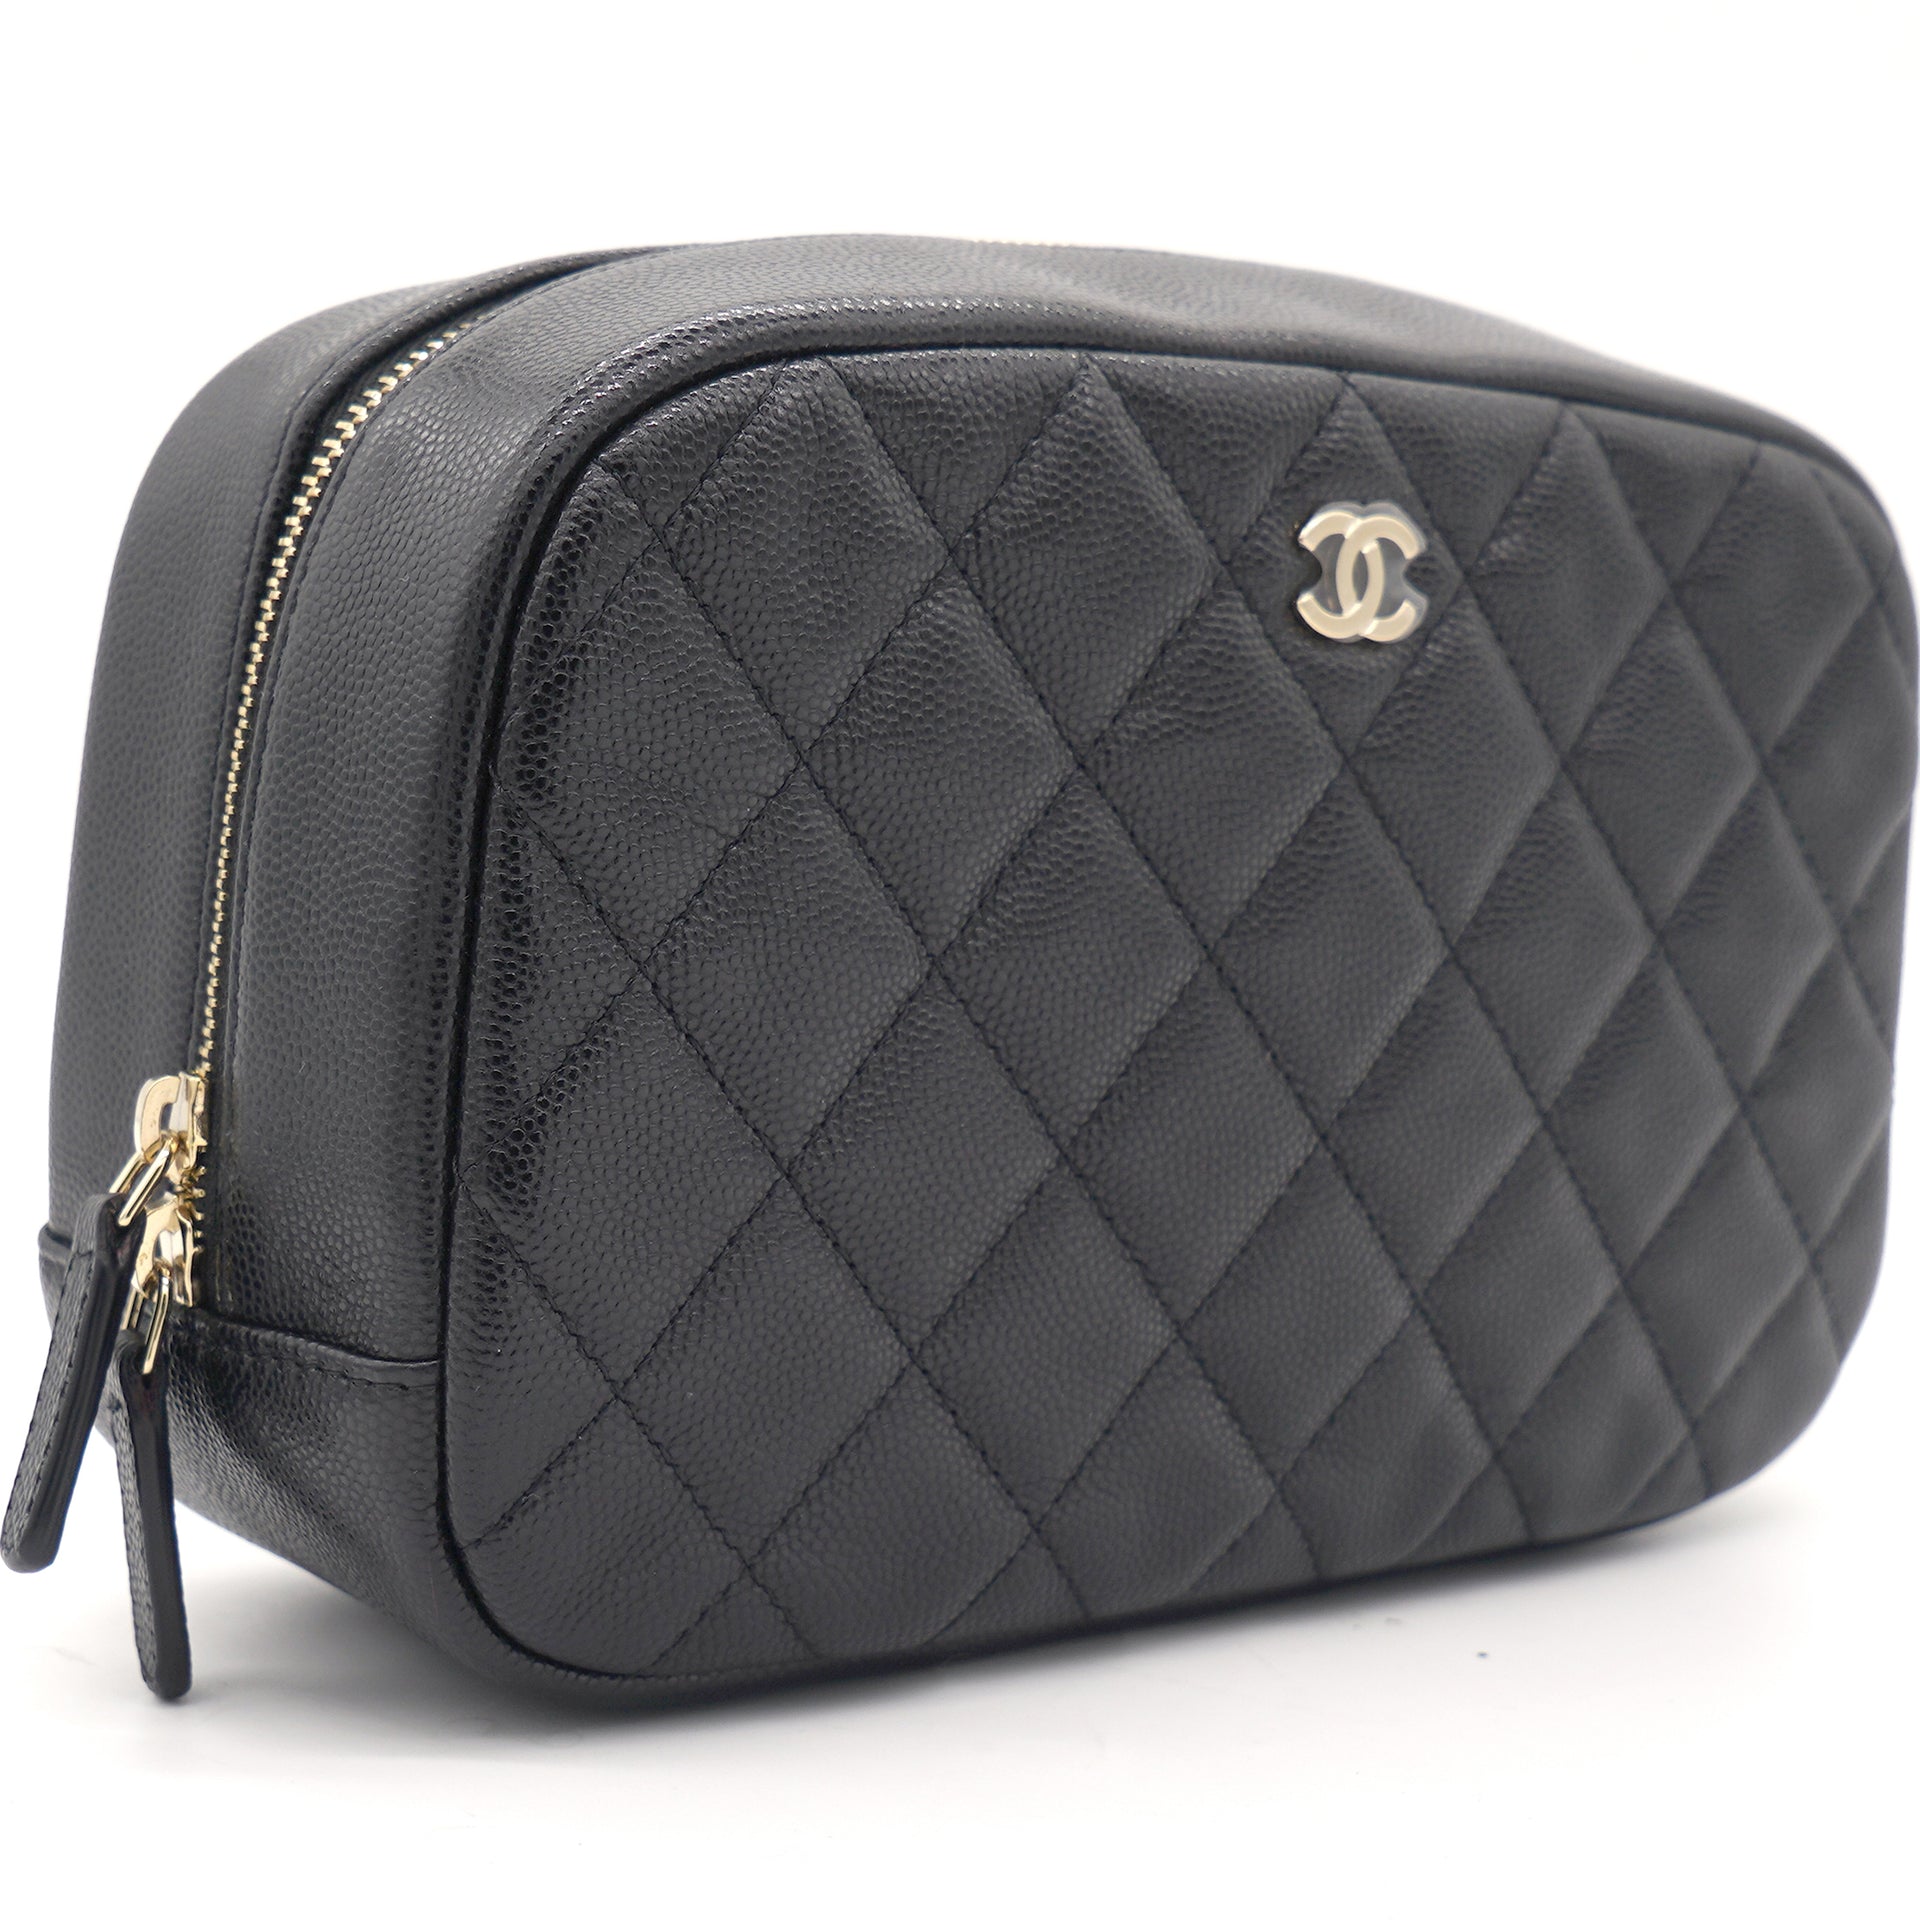 CHANEL, Bags, Chanel Small Caviar Cosmetic Pouch